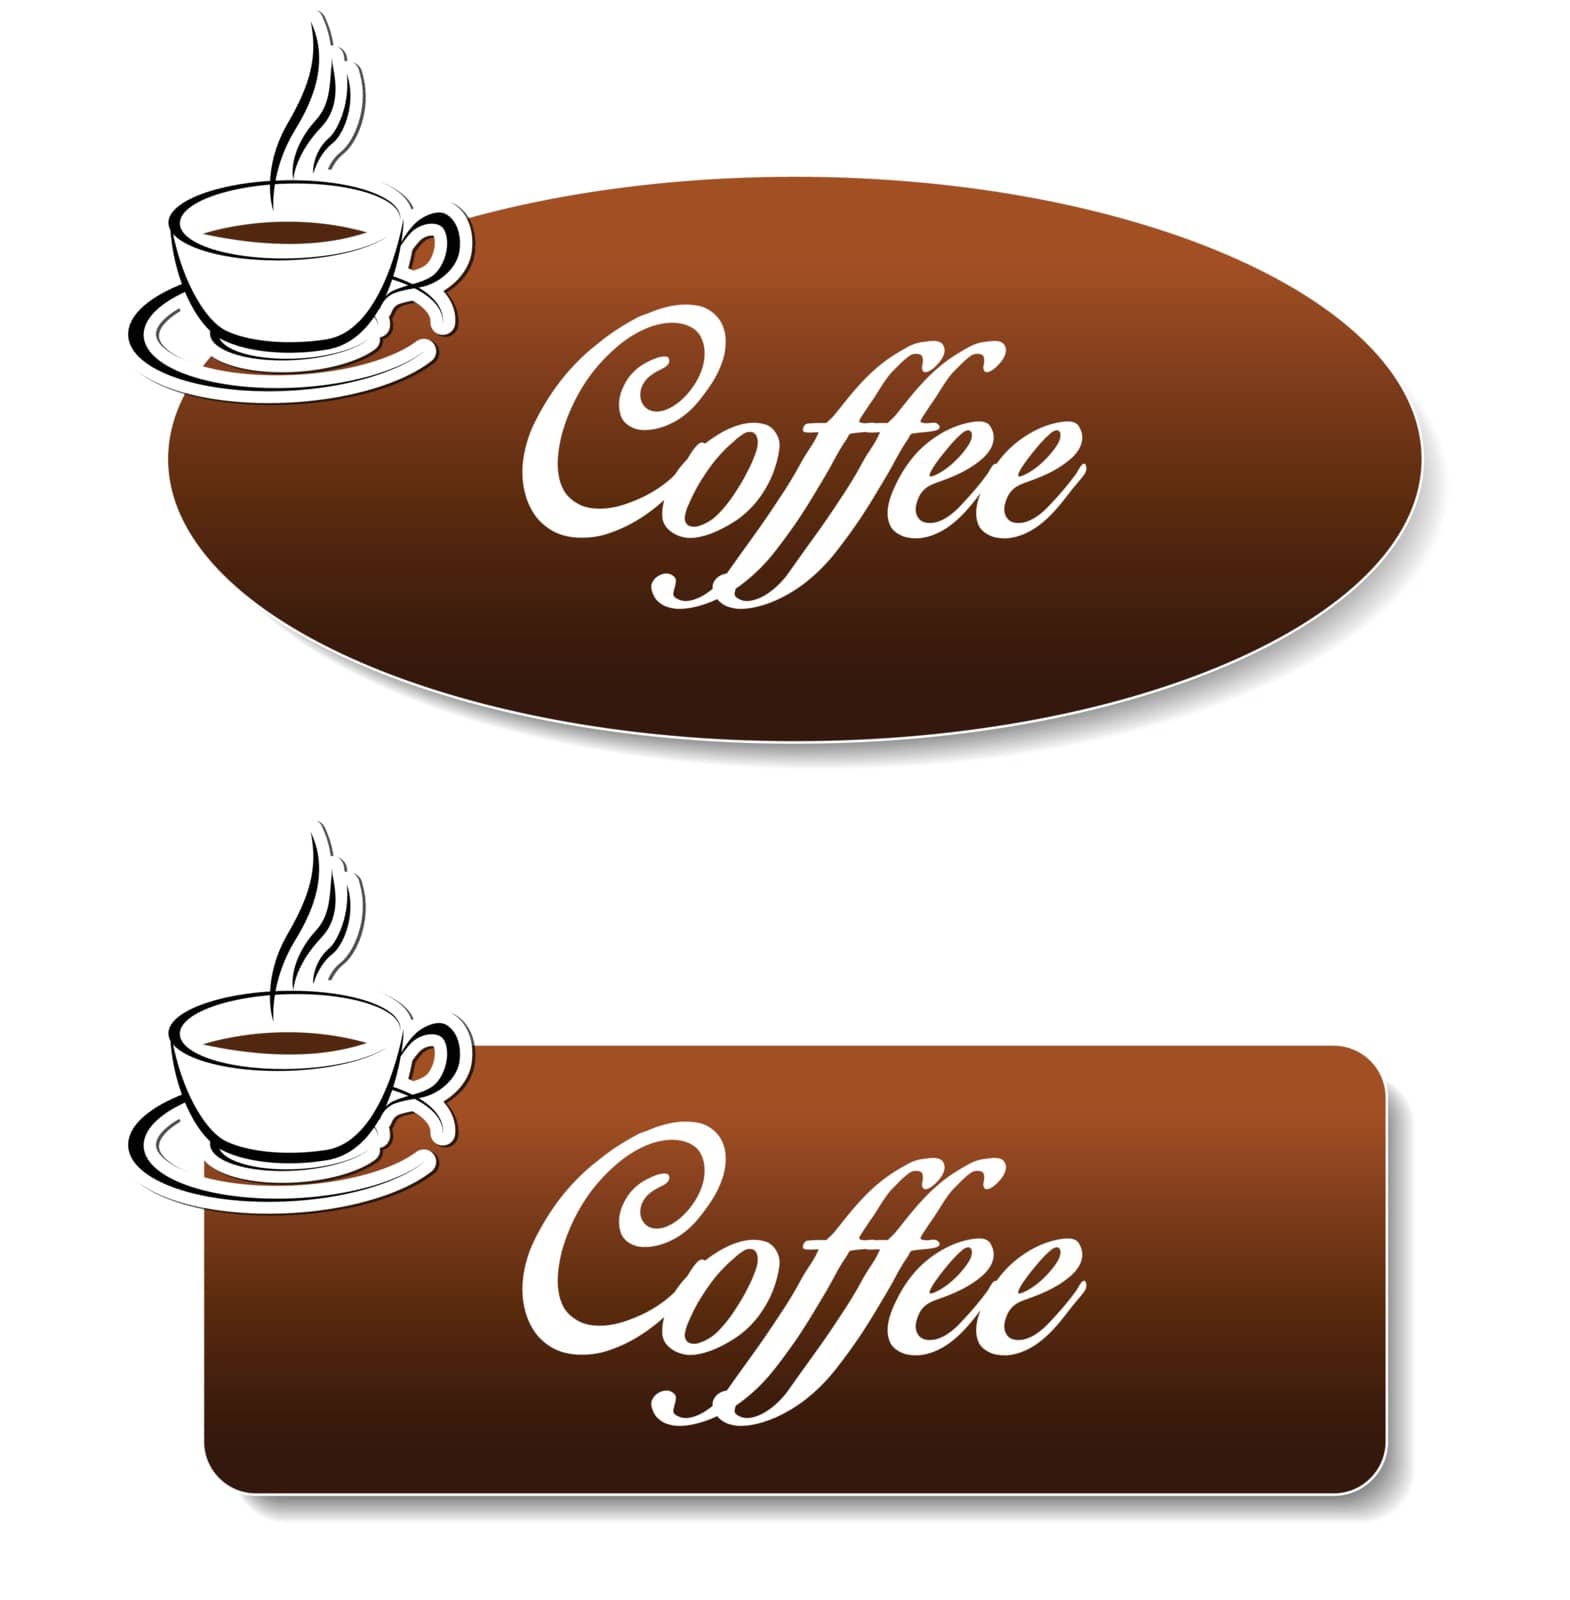 Illustration of brown coffee banners on white background